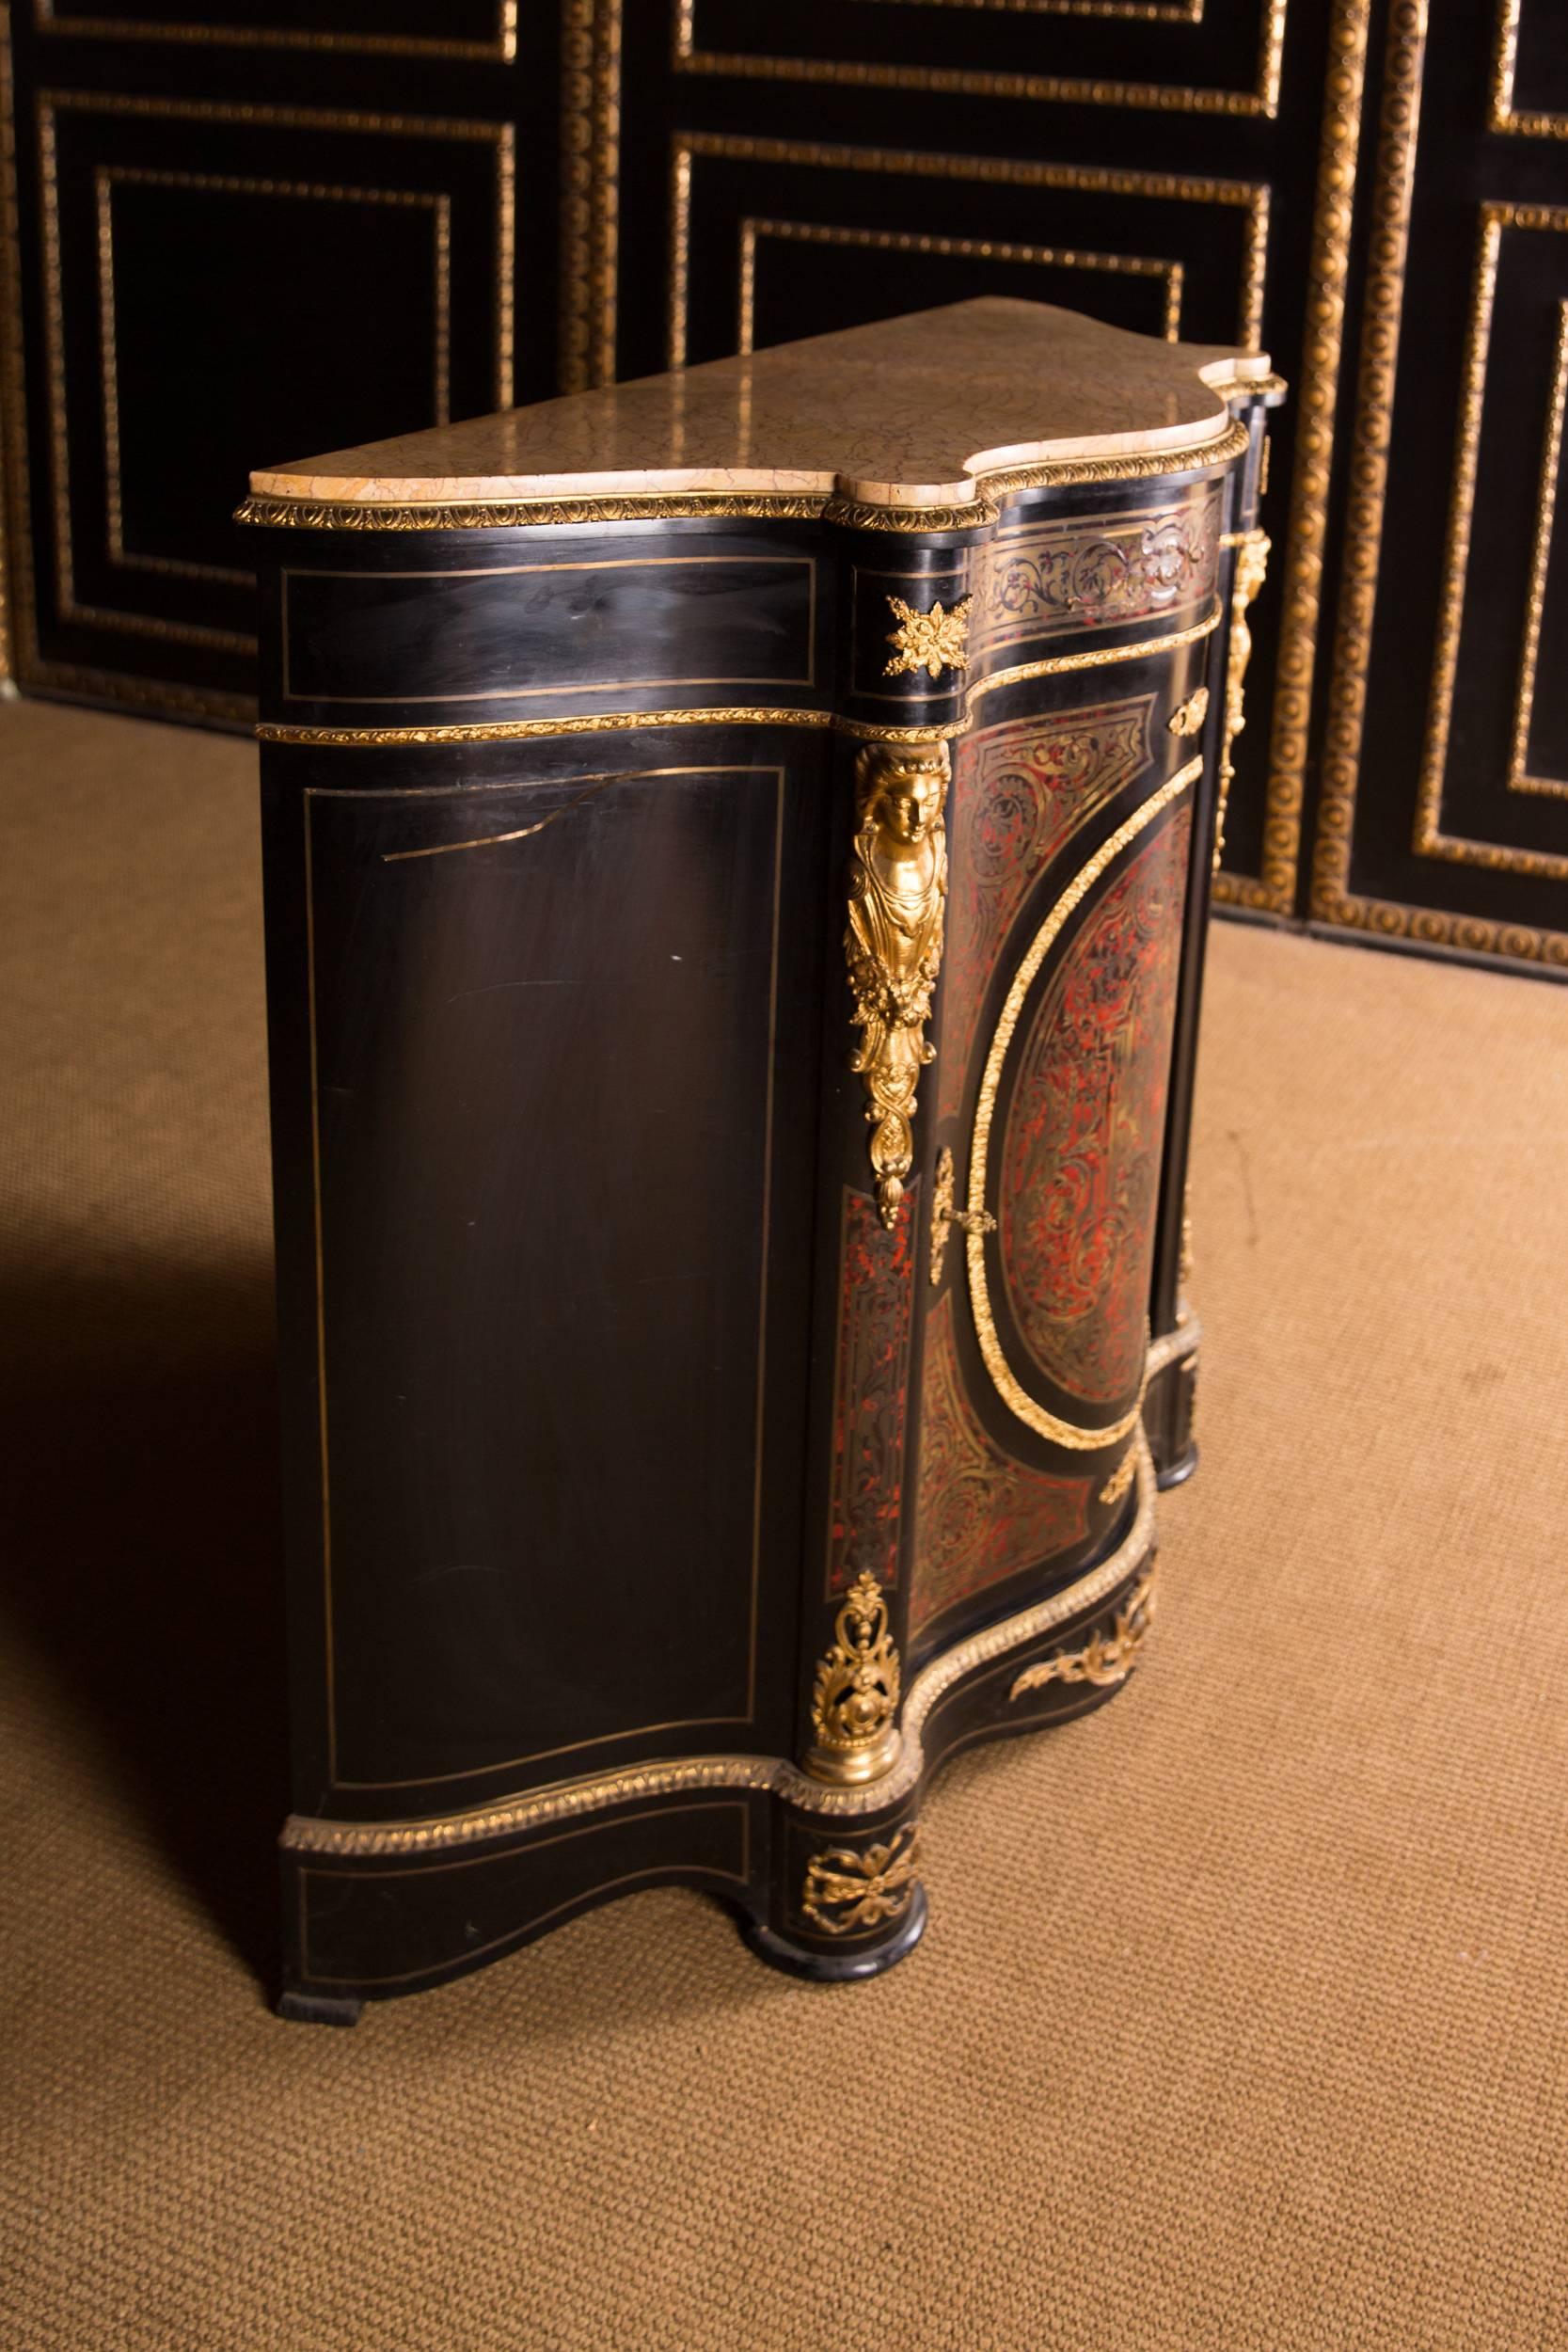 19th Century Original French Boulle Commode in the Louis XV Style 1860 (19. Jahrhundert)